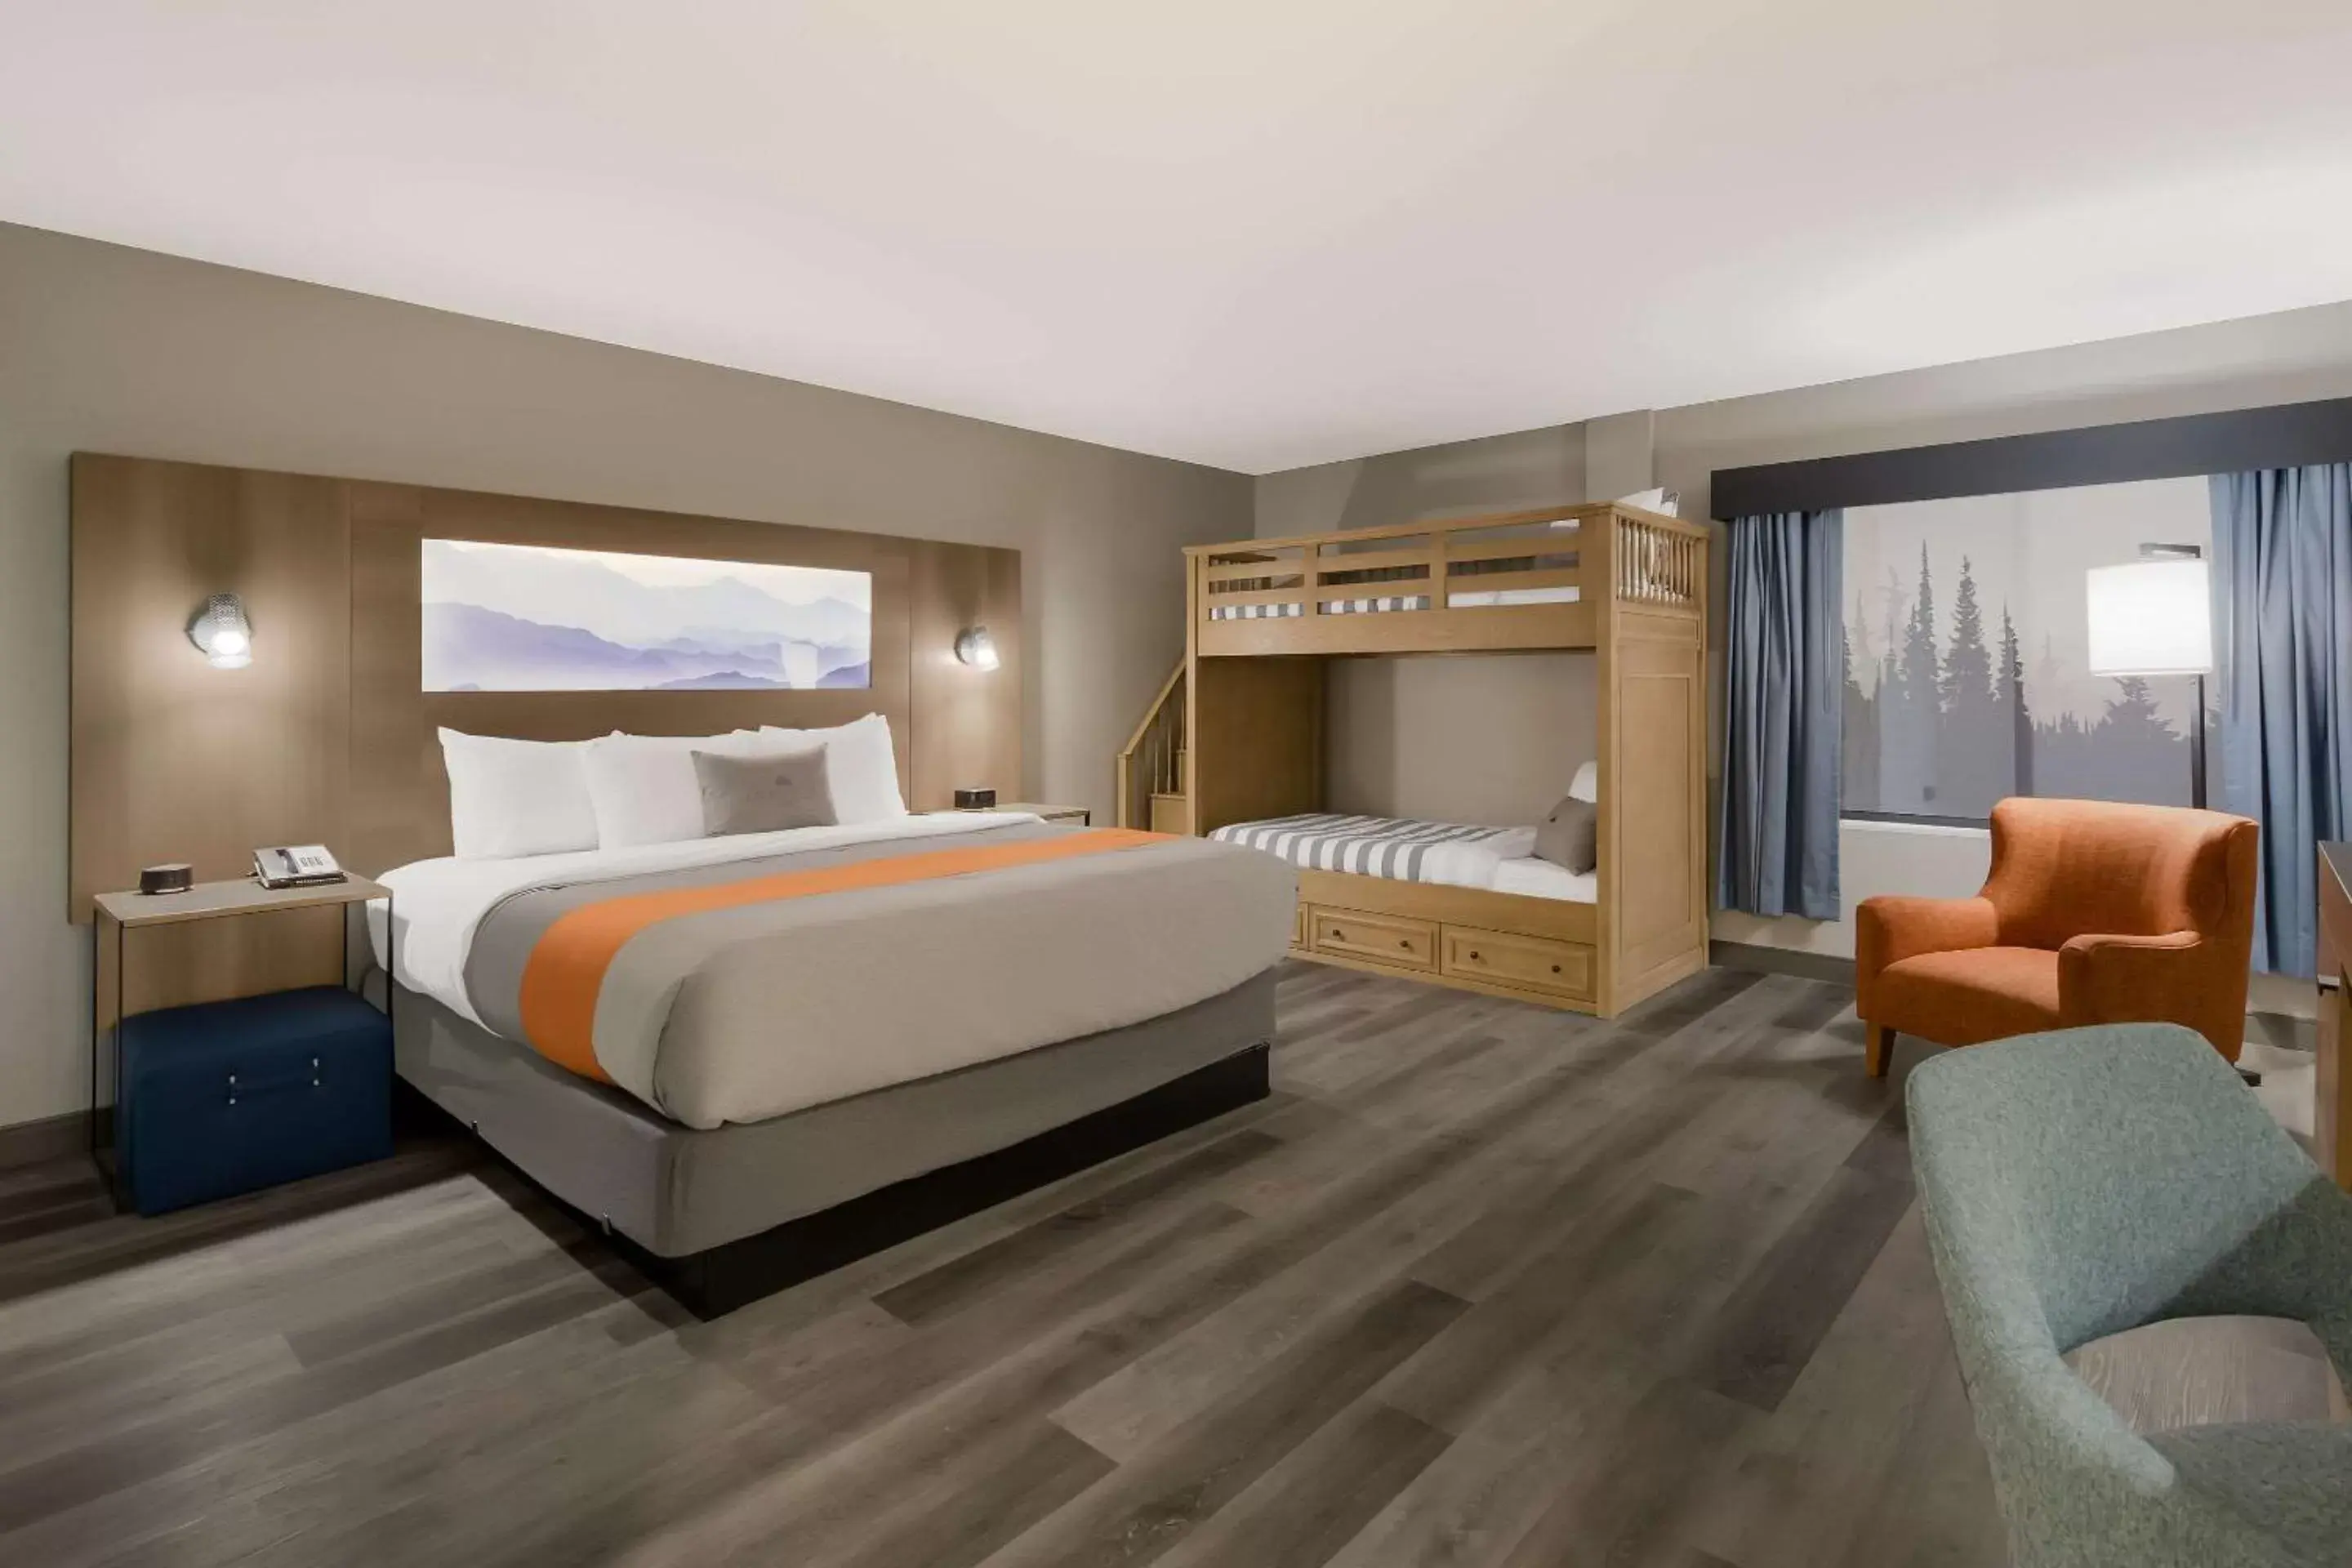 Bedroom in Graystone Lodge, Ascend Hotel Collection